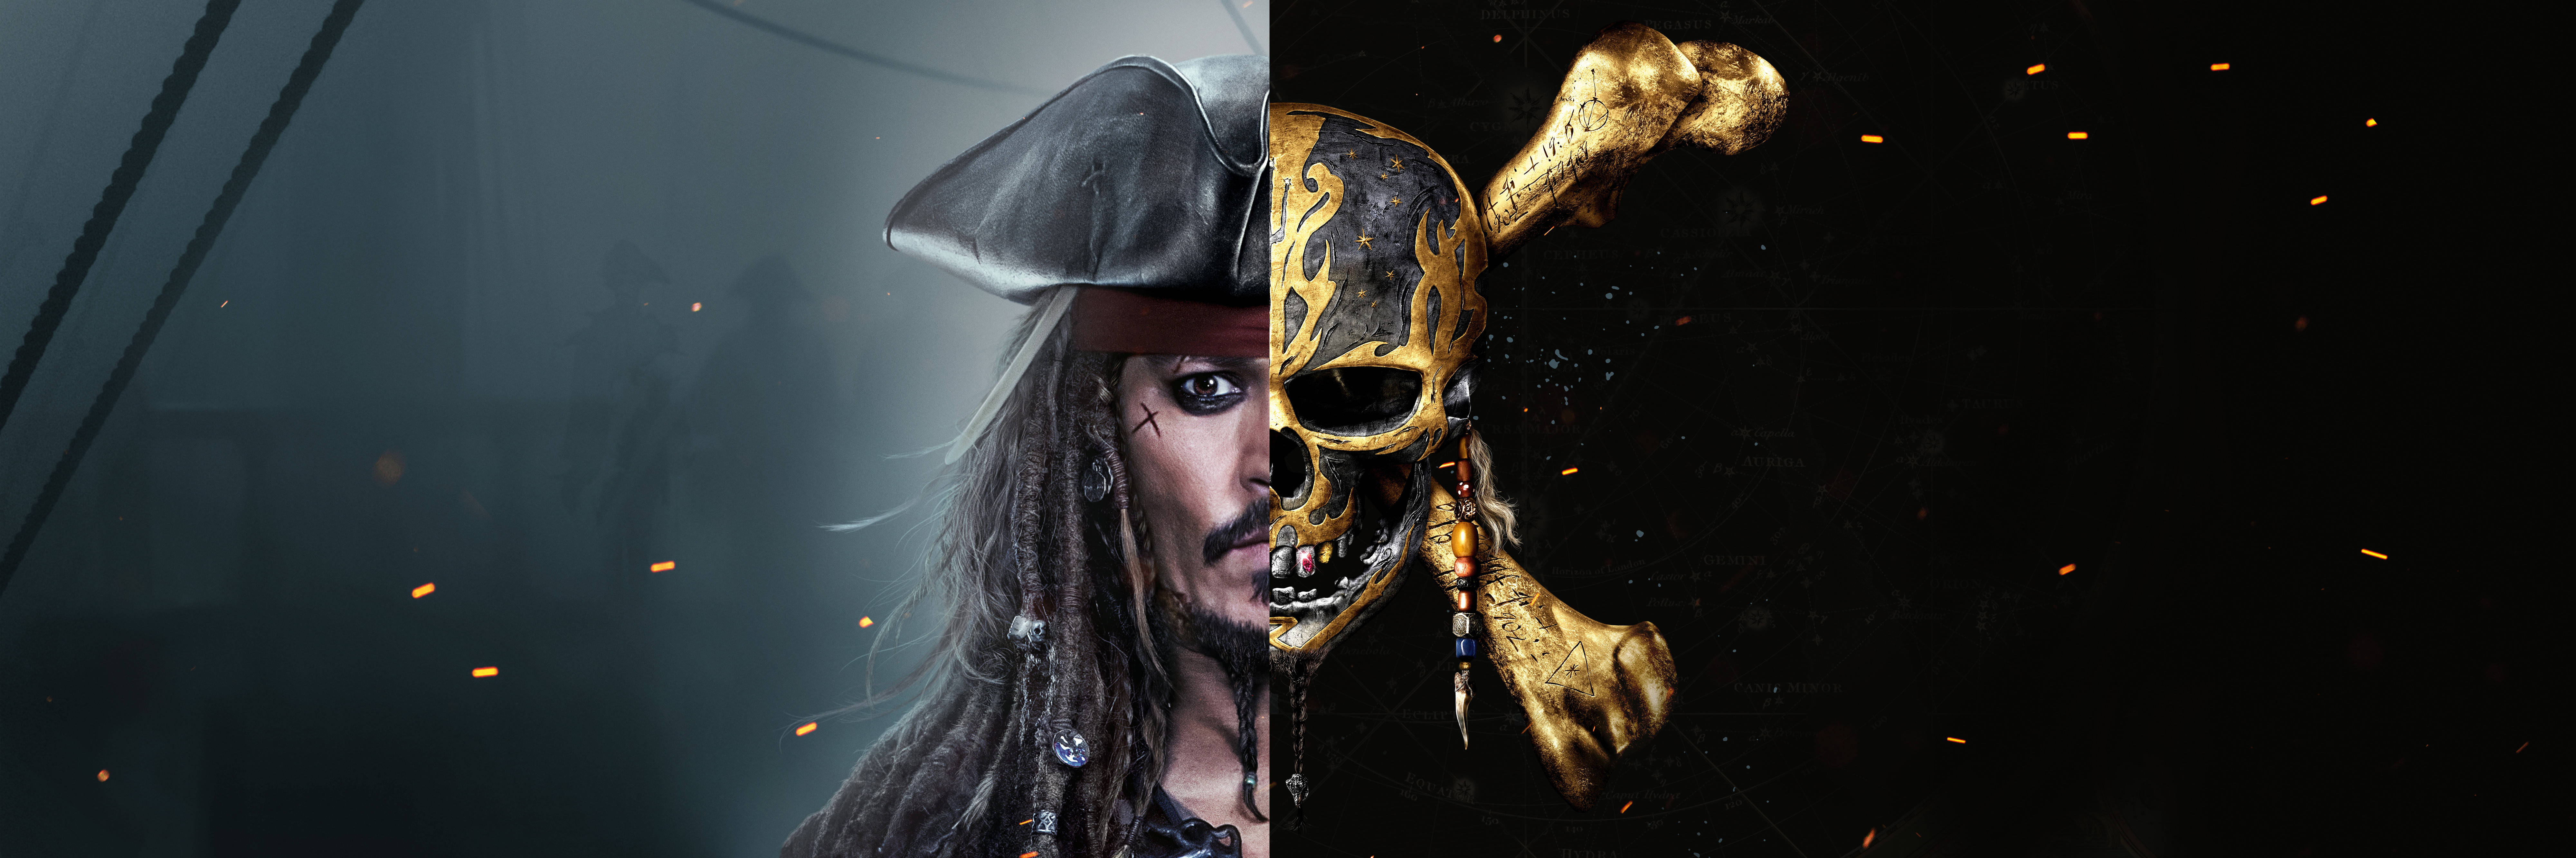 Jack Sparrow And Skull Background